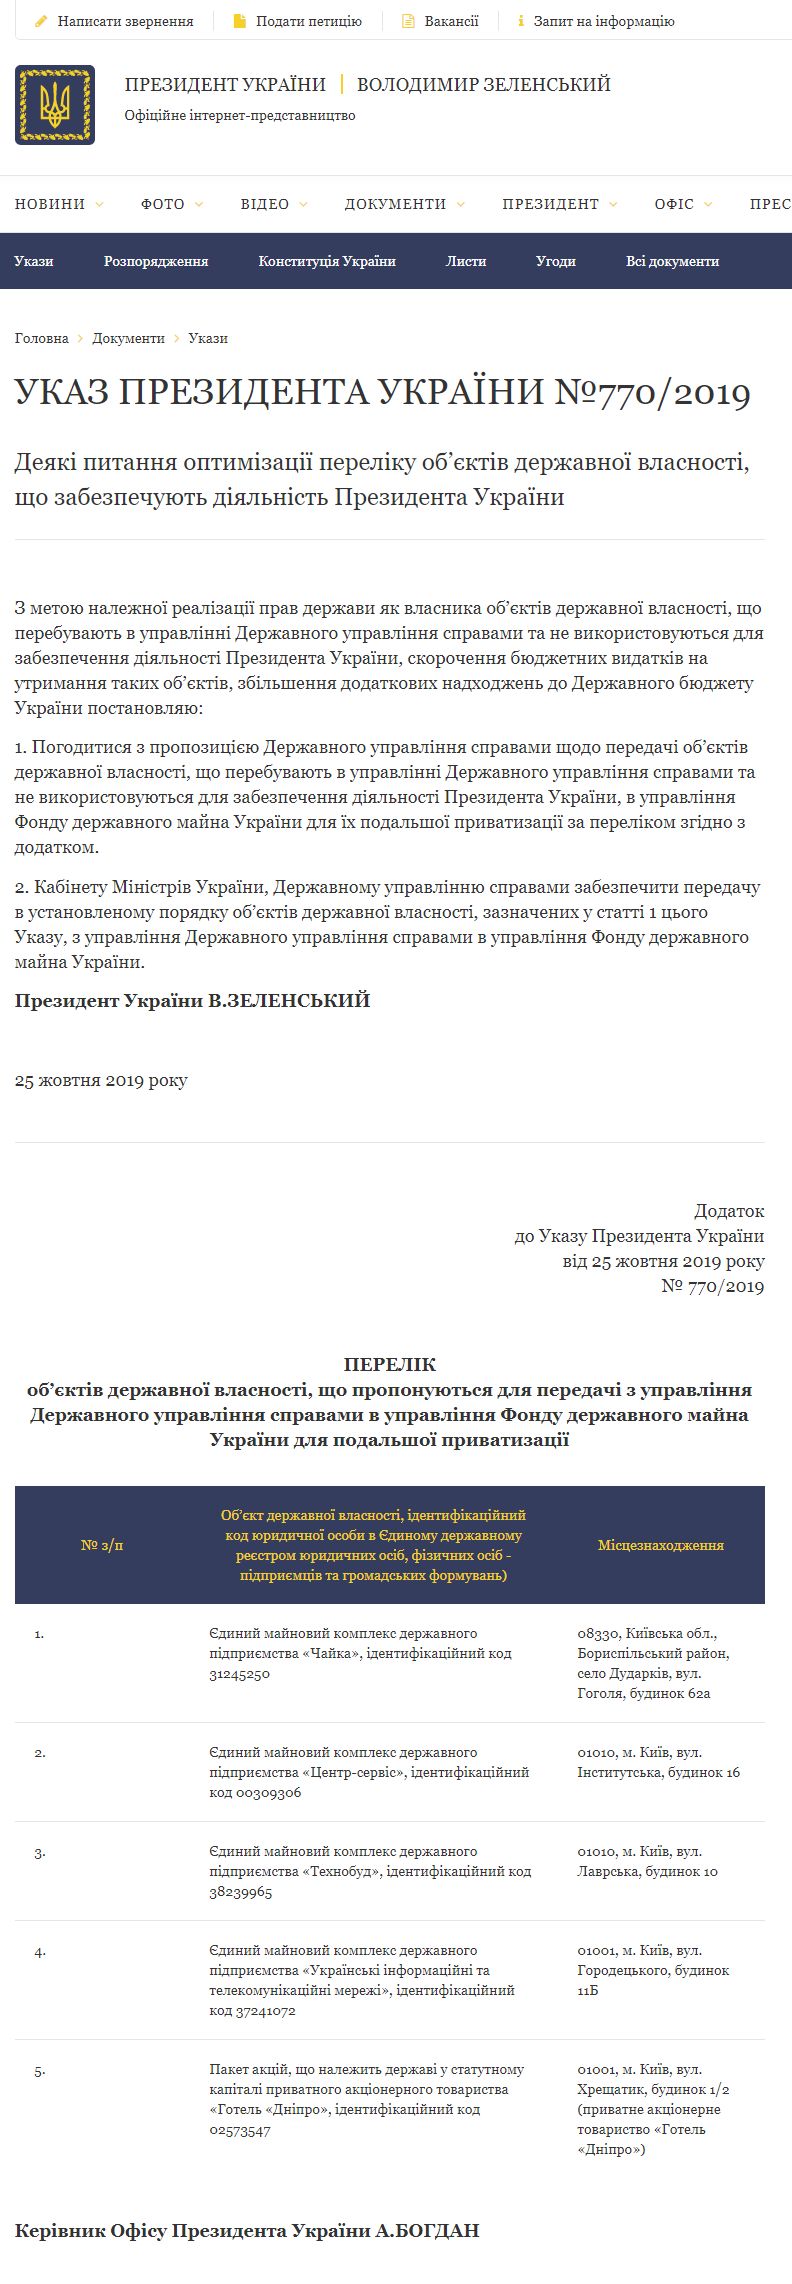 https://www.president.gov.ua/documents/decrees?s-num=&contain-rule=contains&s-text=%D0%B4%D0%B5%D1%80%D0%B6%D0%B0%D0%B2%D0%BD%D0%BE%D1%97+%D0%B2%D0%BB%D0%B0%D1%81%D0%BD%D0%BE%D1%81%D1%82%D1%96&date-from=01-10-2018&date-to=16-02-2020&order=desc&